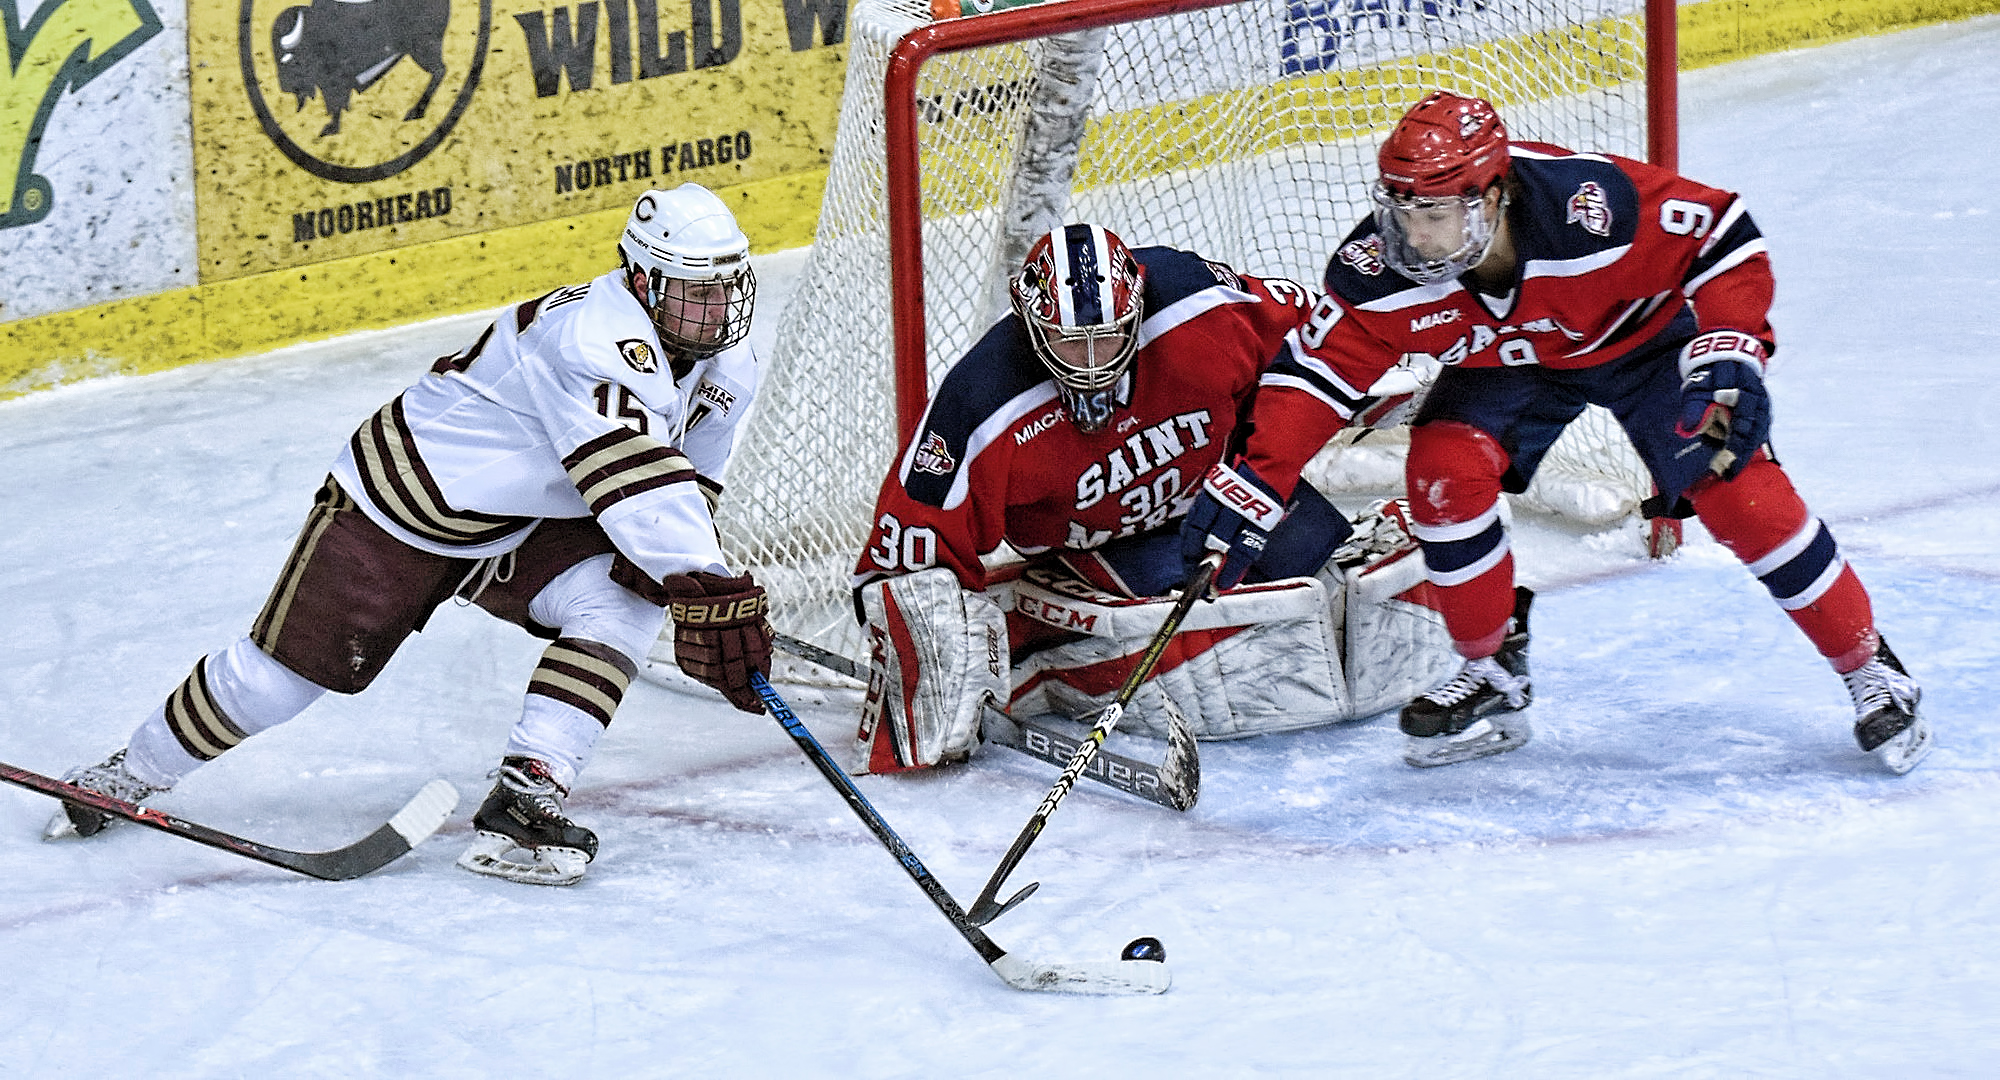 Mario Bianchi works the puck around the St. Mary's goal to set up the Cobbers' second goal in their MIAC quarterfinal game against the Cardinals.